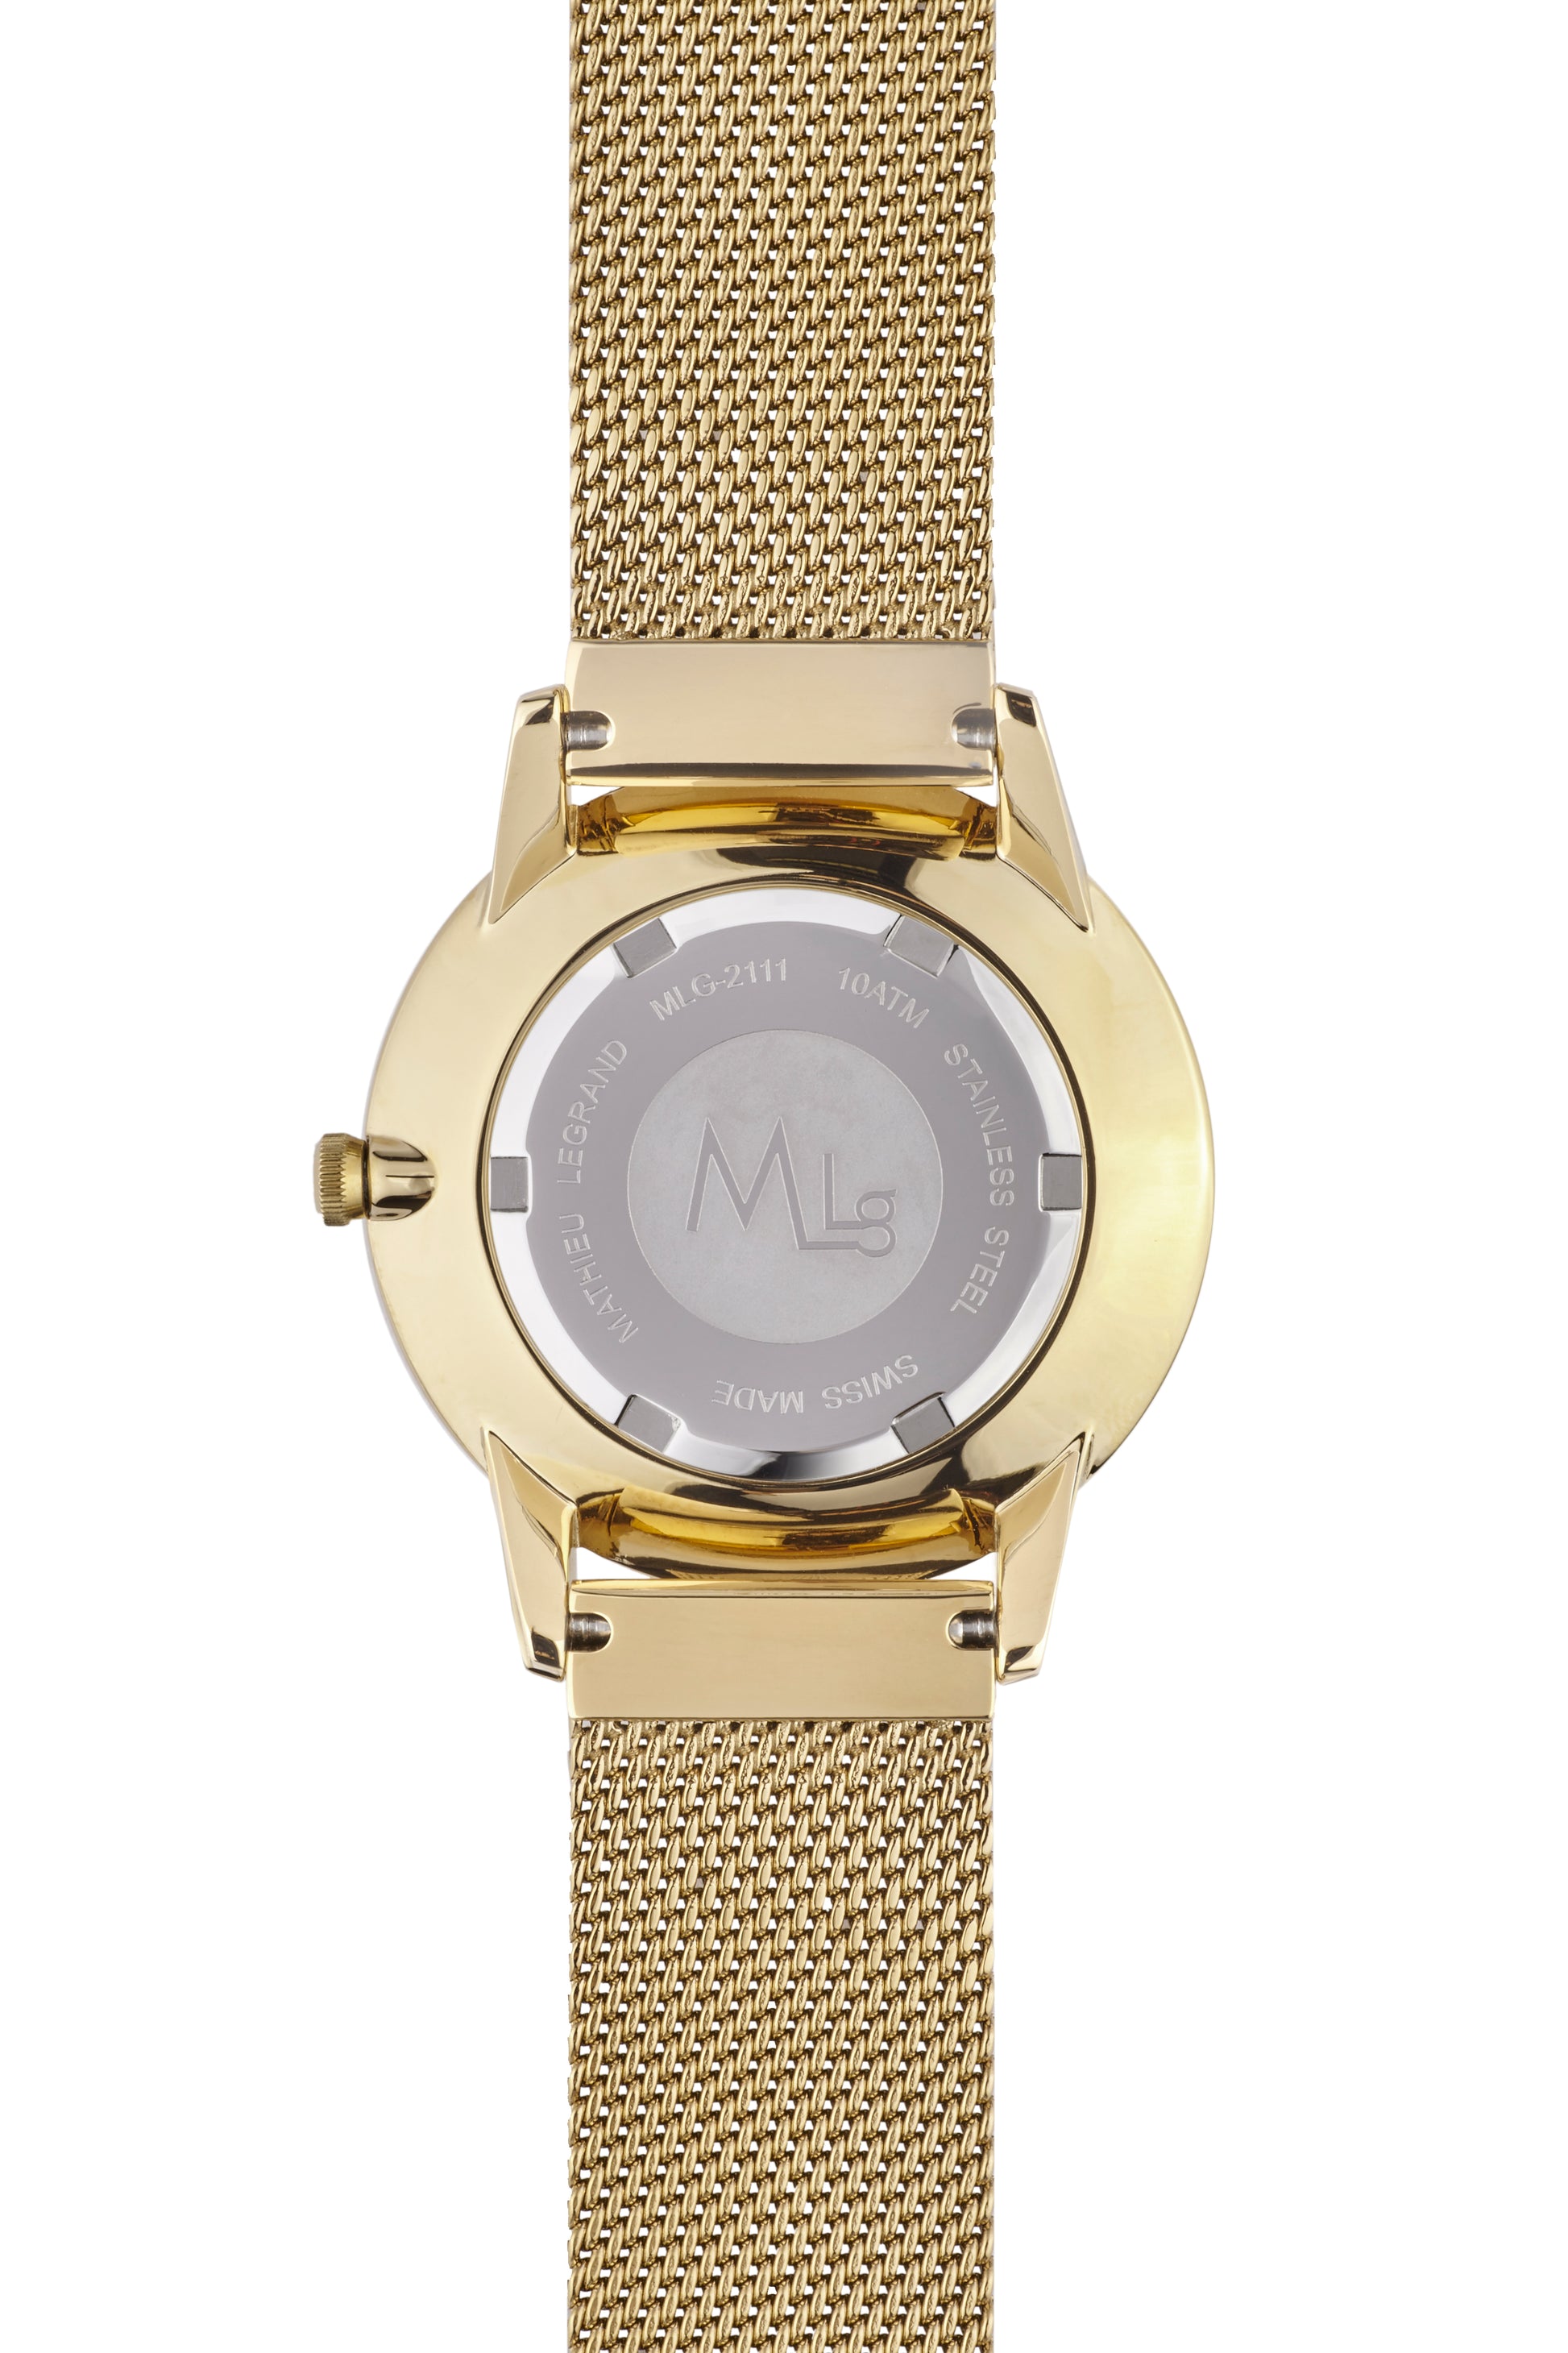 Automatic watches — Galantine — Mathieu Legrand — gold IP white mother of pearl